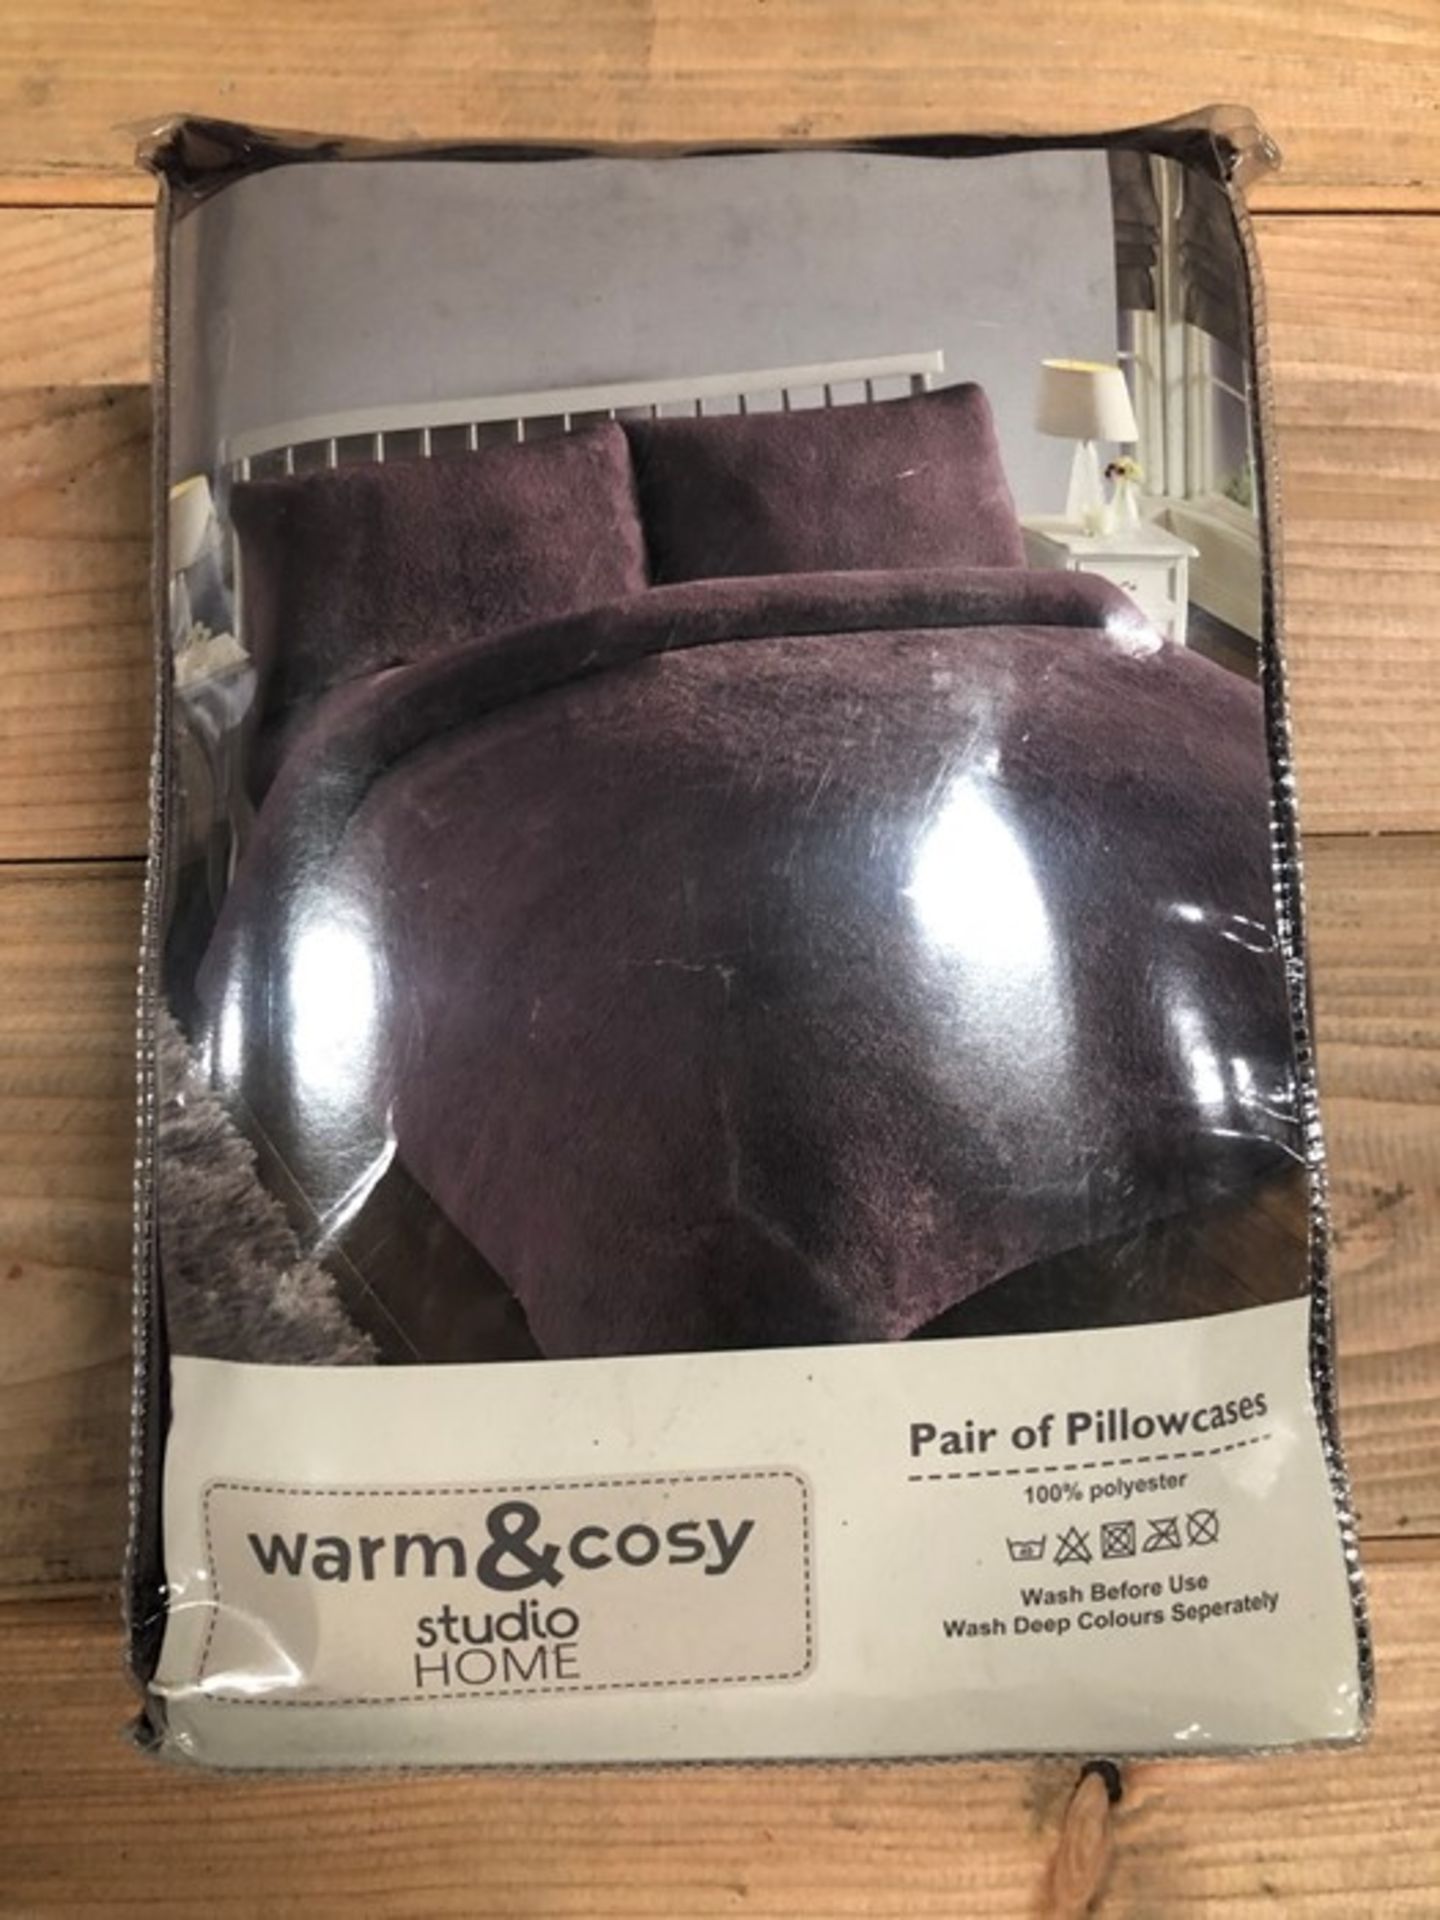 1 AS NEW BAGGED WARM AND COSY PAIR OF PILLOWCASES IN PLUM (PUBLIC VIEWING AVAILABLE)